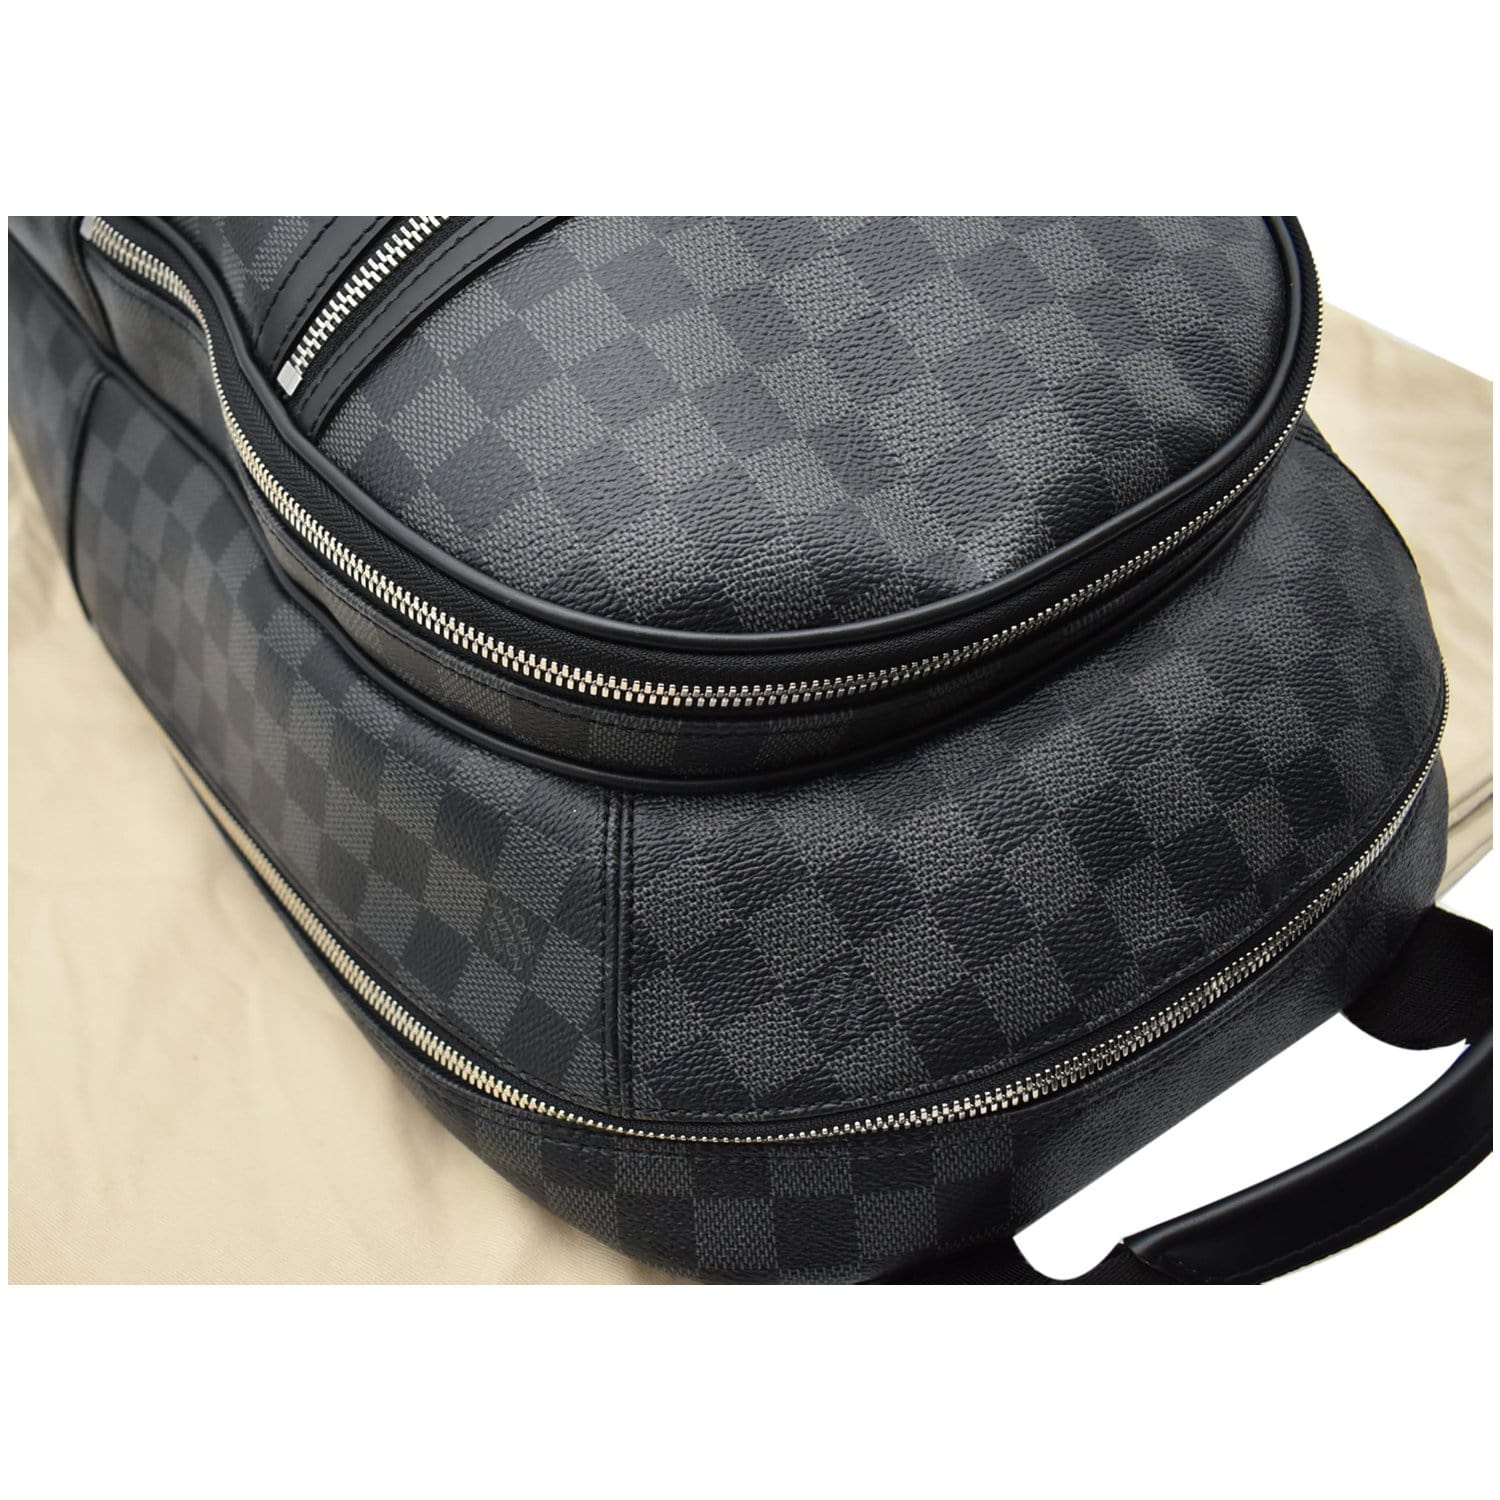 How To Spot A Fake Louis Vuitton Michael Backpack